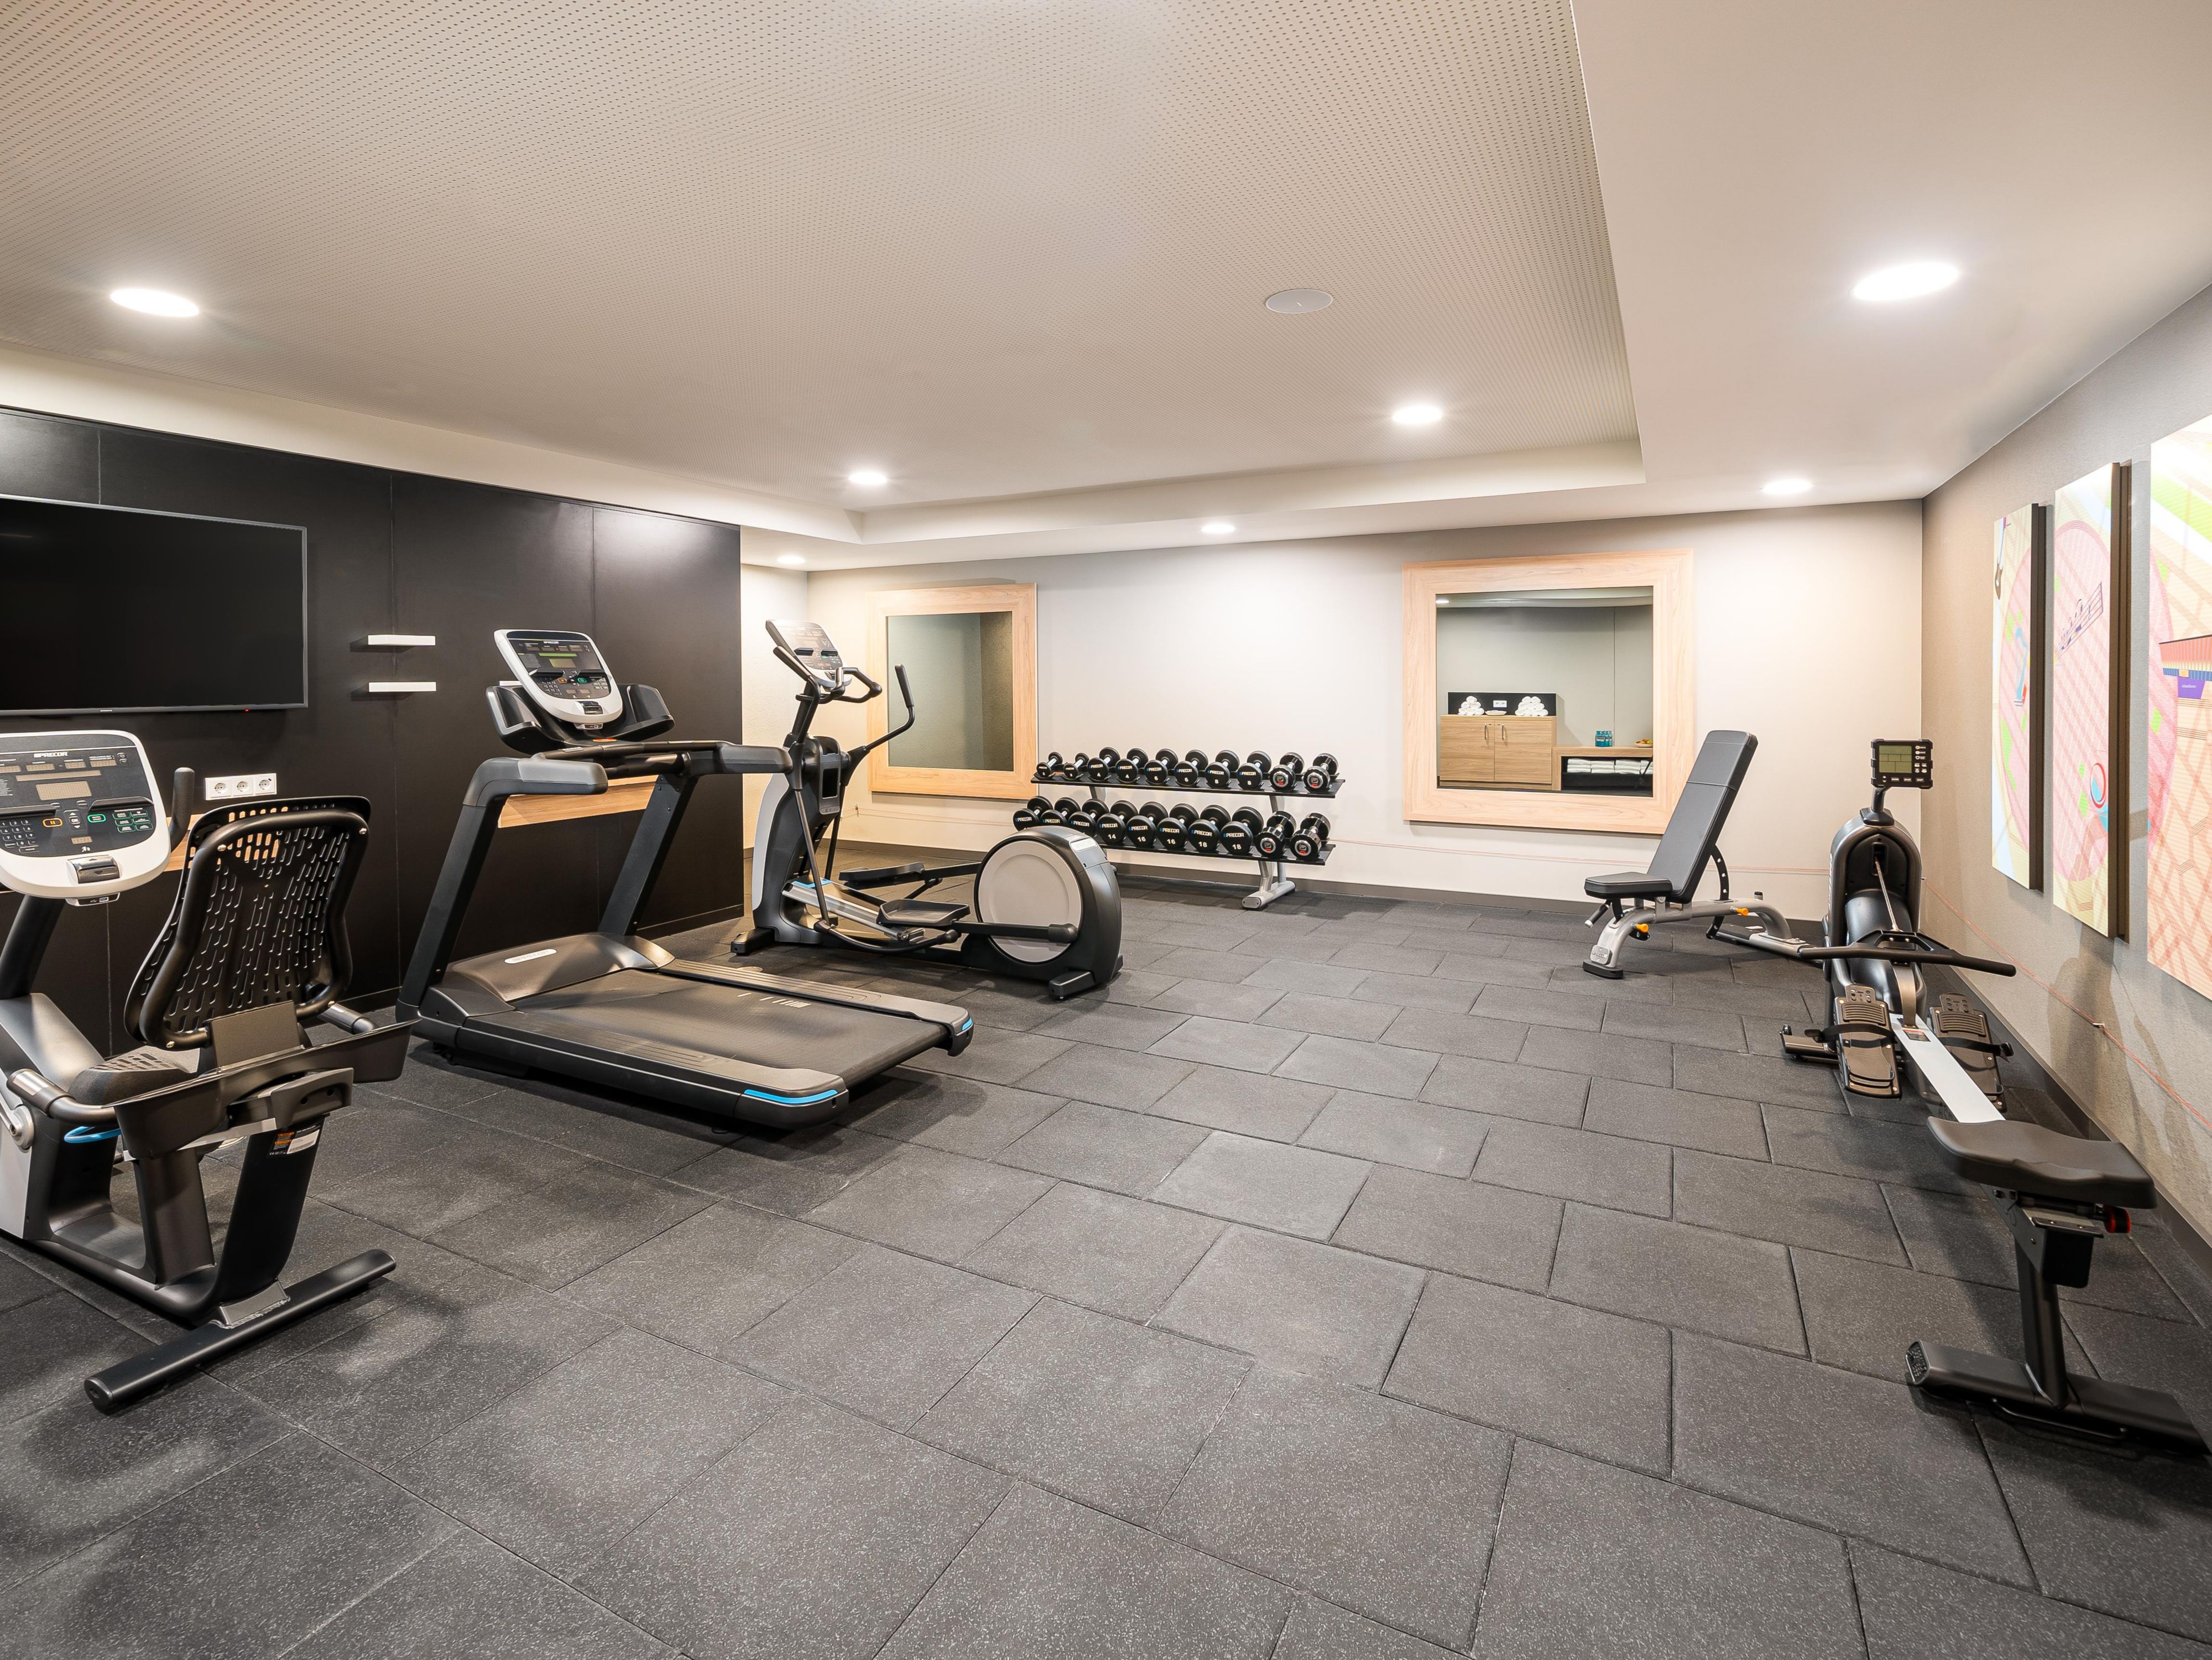 Of course, sport shouldn't be neglected on a business trip or vacation. Our fitness center is available 24/7 free of charge and is equipped with a treadmill, cross trainer, rowing bench and Precor weights. Towels and water are of course on site.